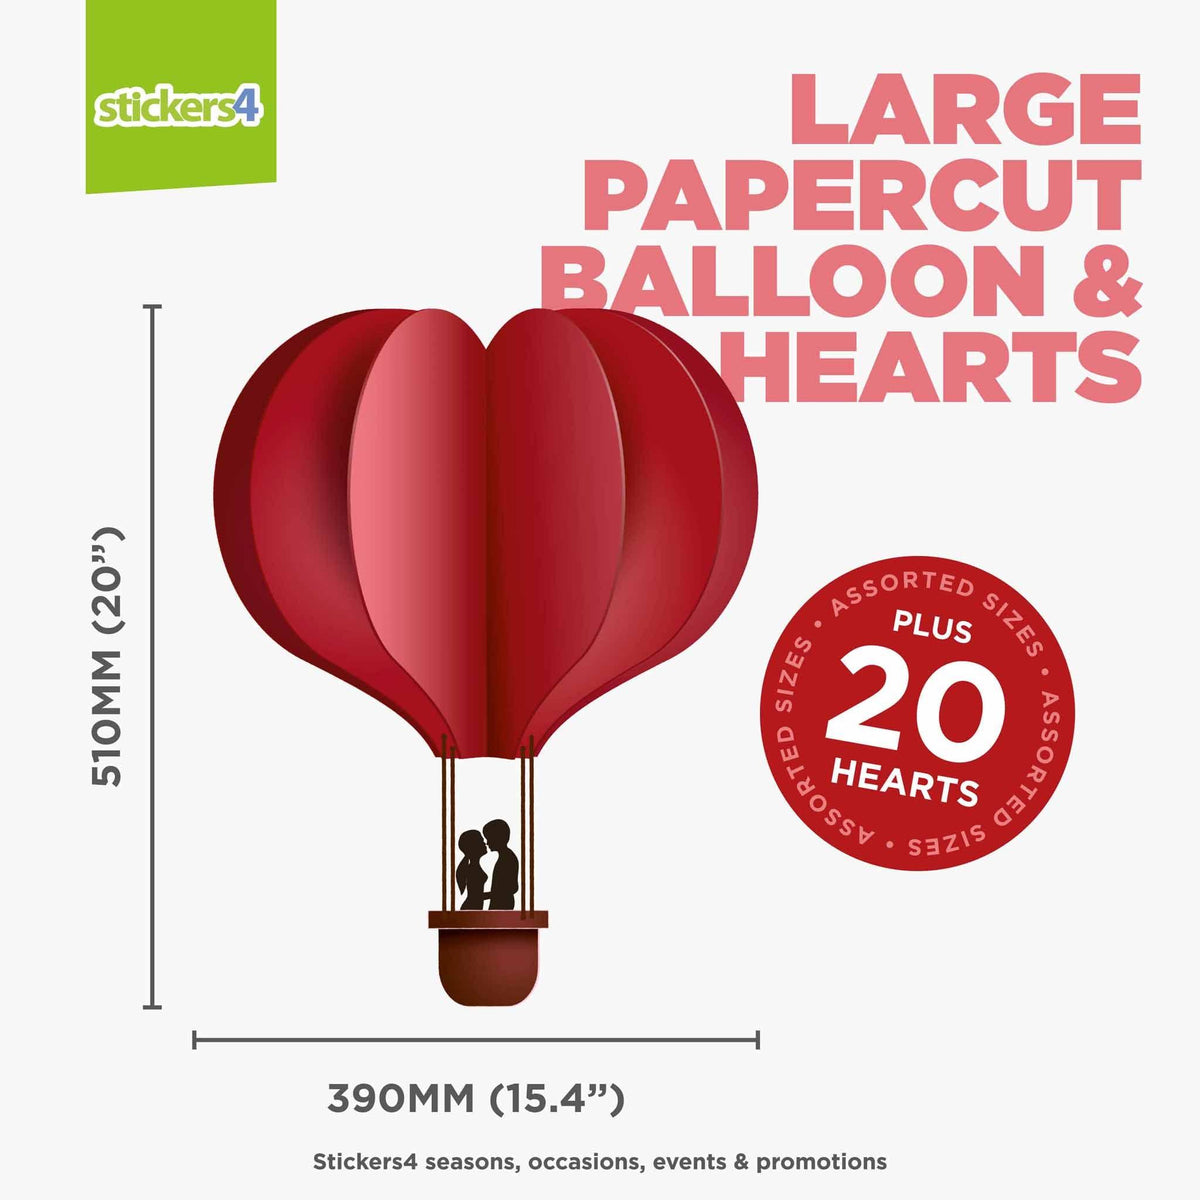 Papercut Balloon with Hearts Window Cling Sticker